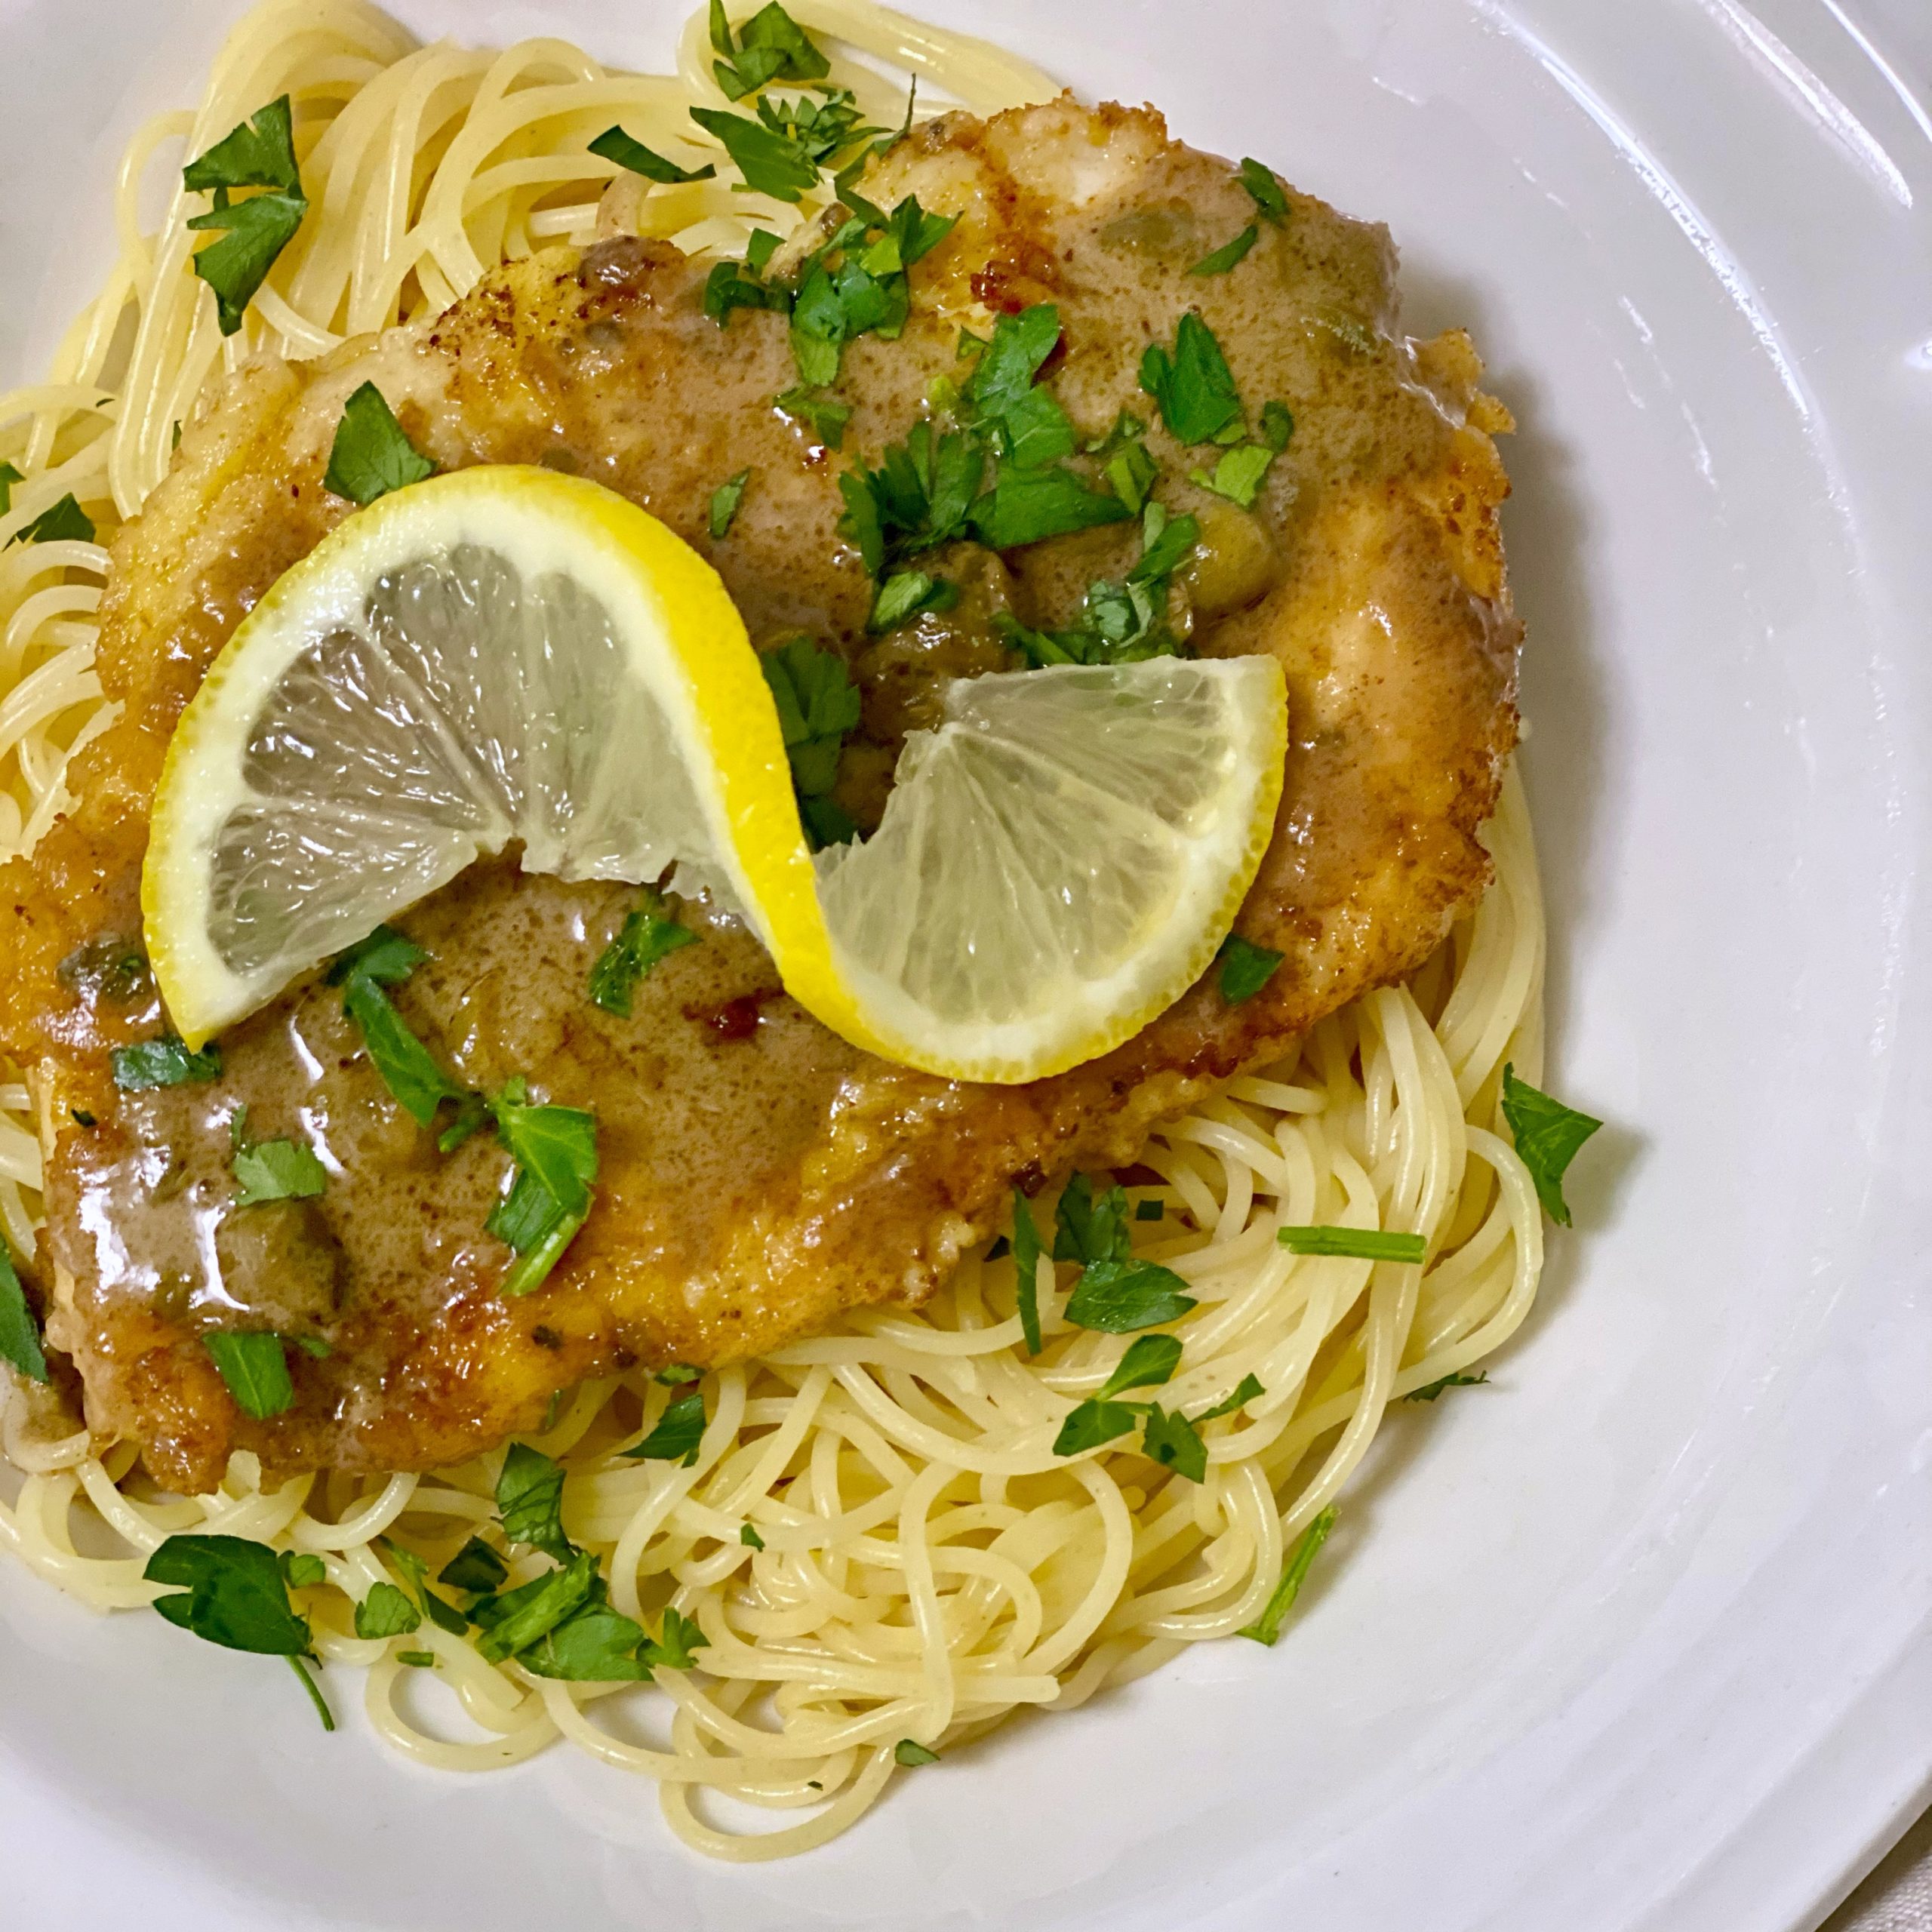 Lemon Chicken with capers and parsley with a lemon for garnish on a bed of angel hair.